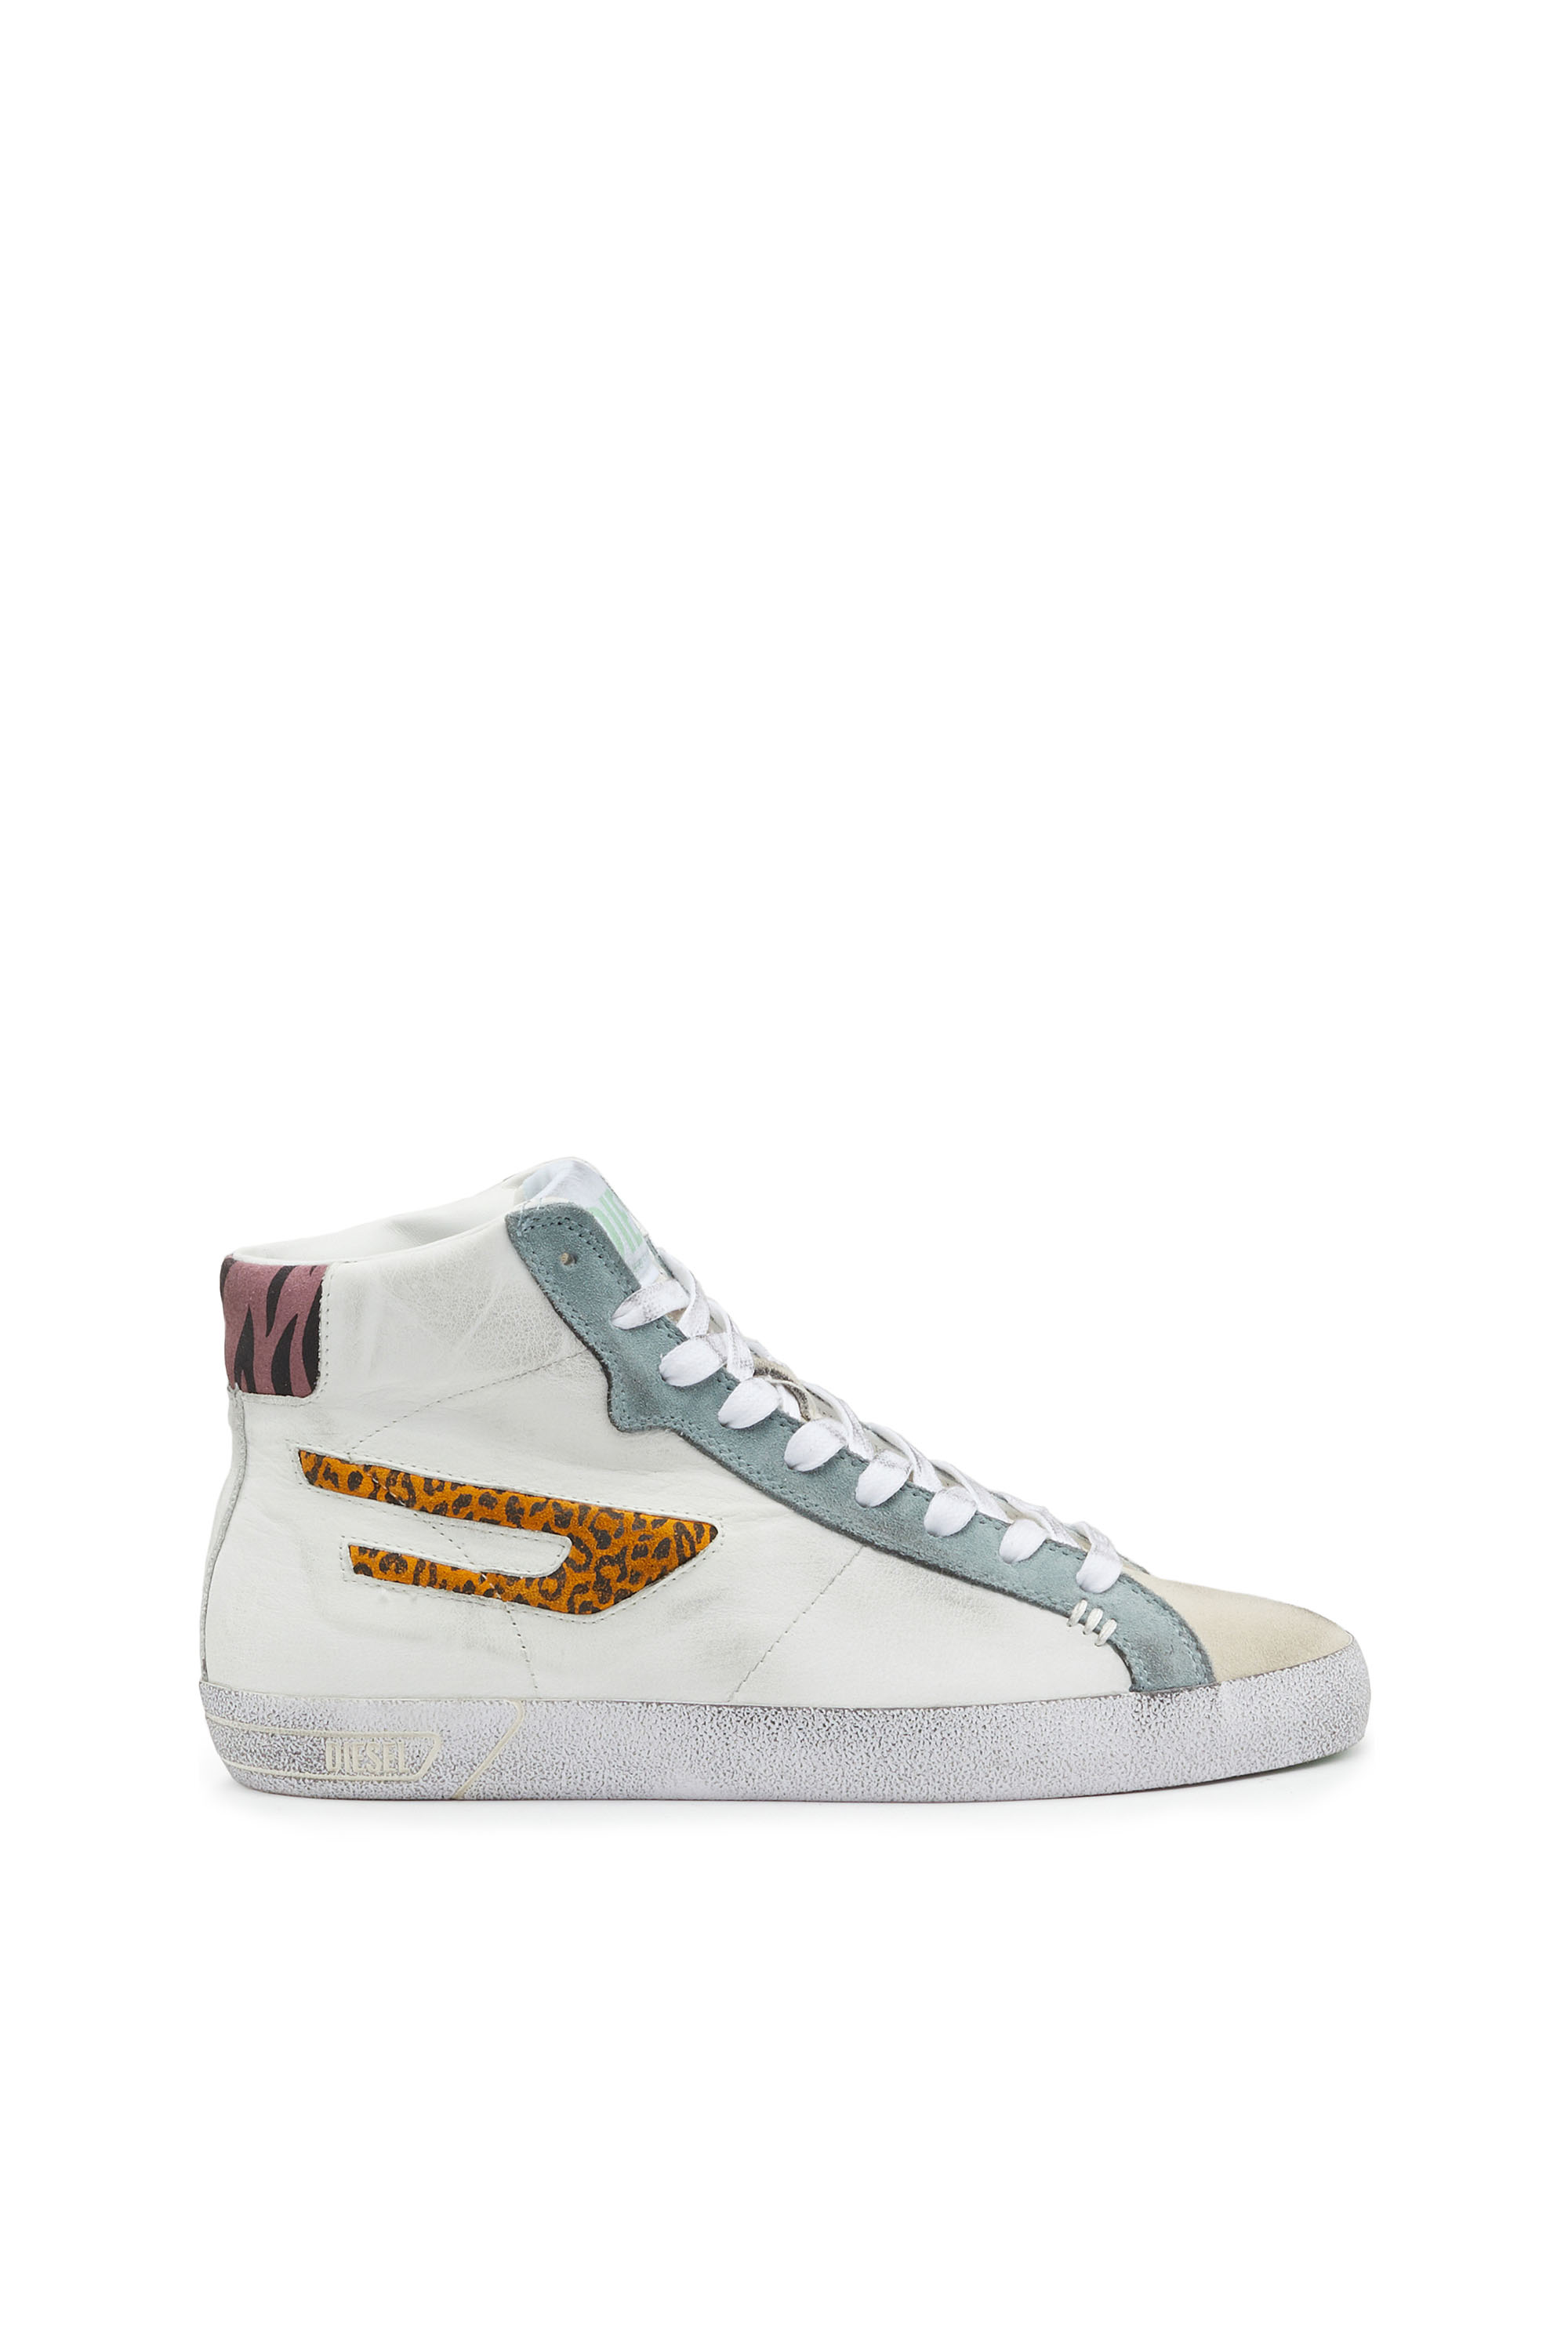 Diesel High-top Sneakers With Animalier Panels In Multicolor